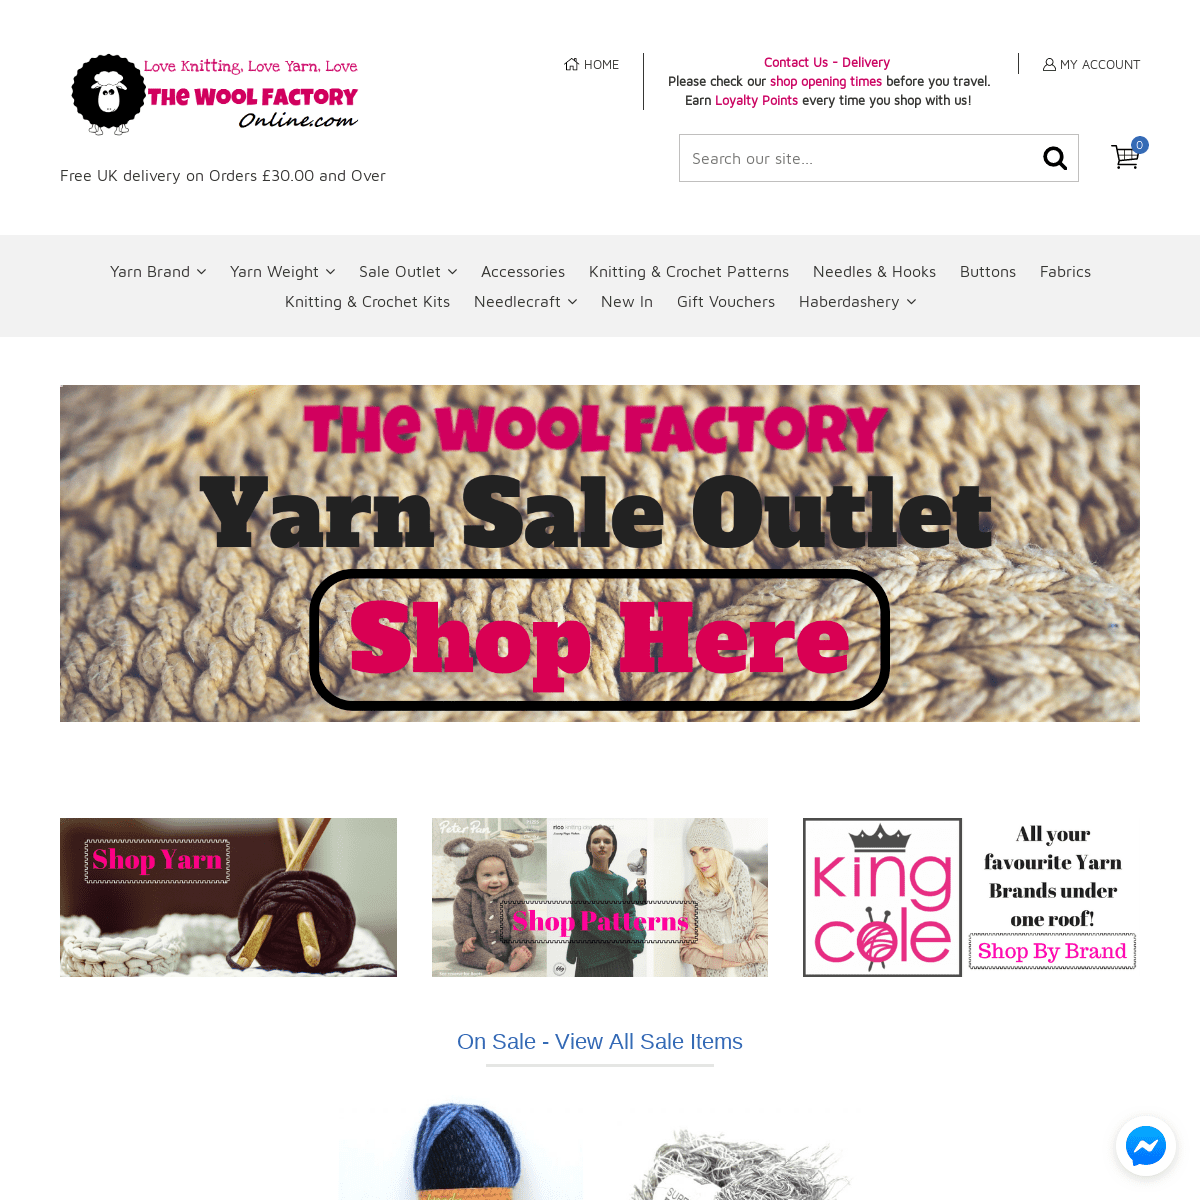 The Wool Factory Online - Knitting Wool & Knitting Yarns - Patterns - Needles, Buttons & Accessories